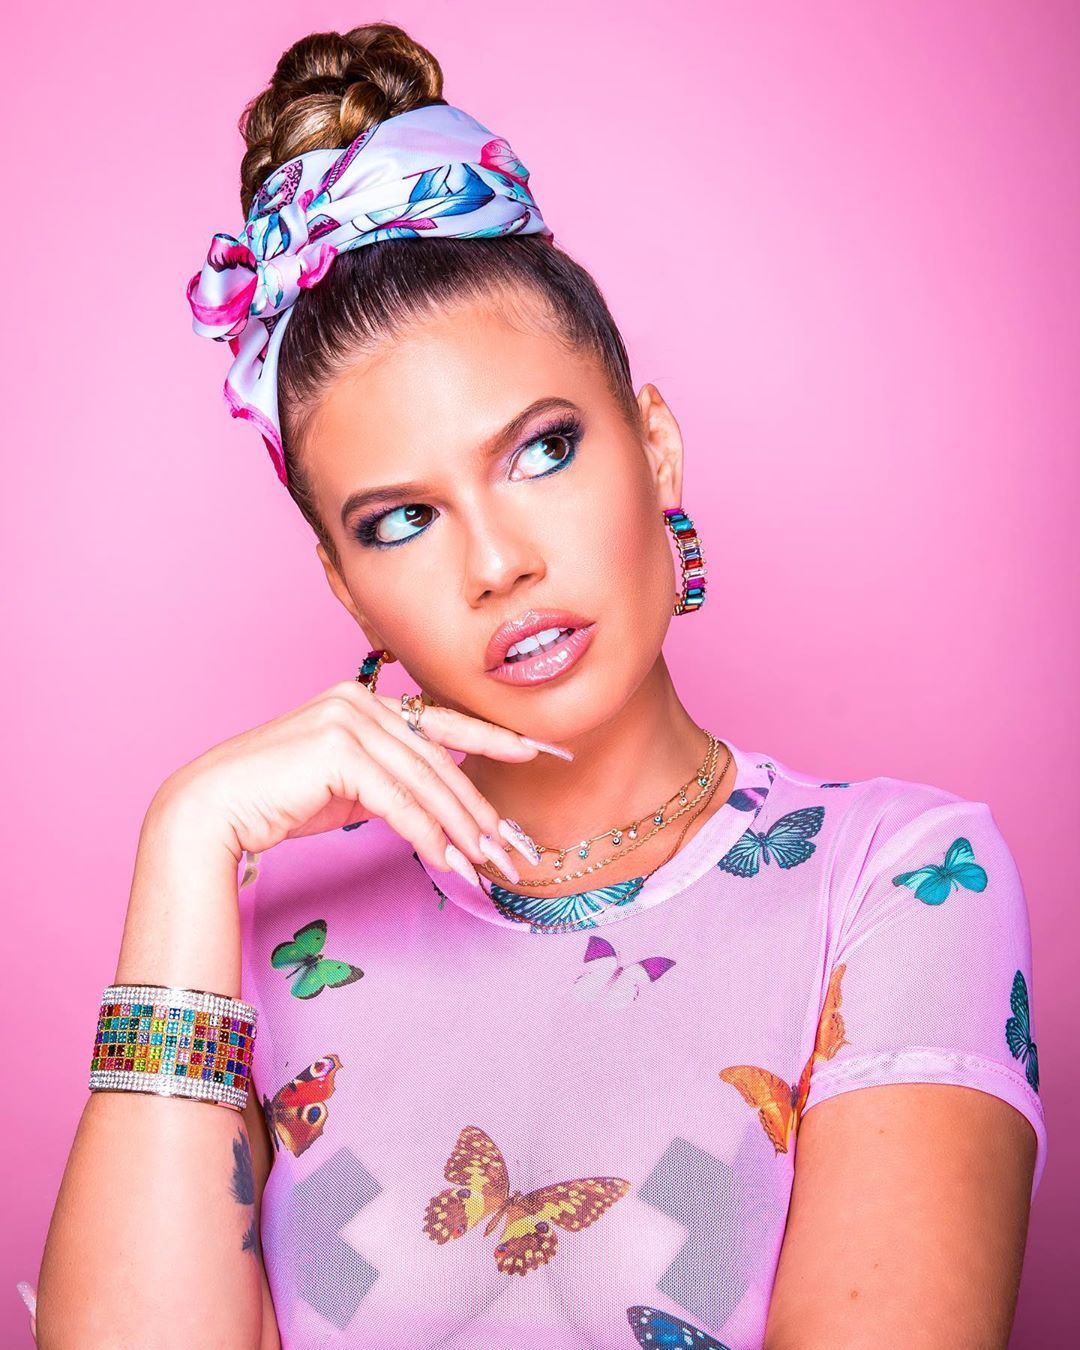 Chanel West Coast bio: Real name, songs, age, net worth, laugh, parent